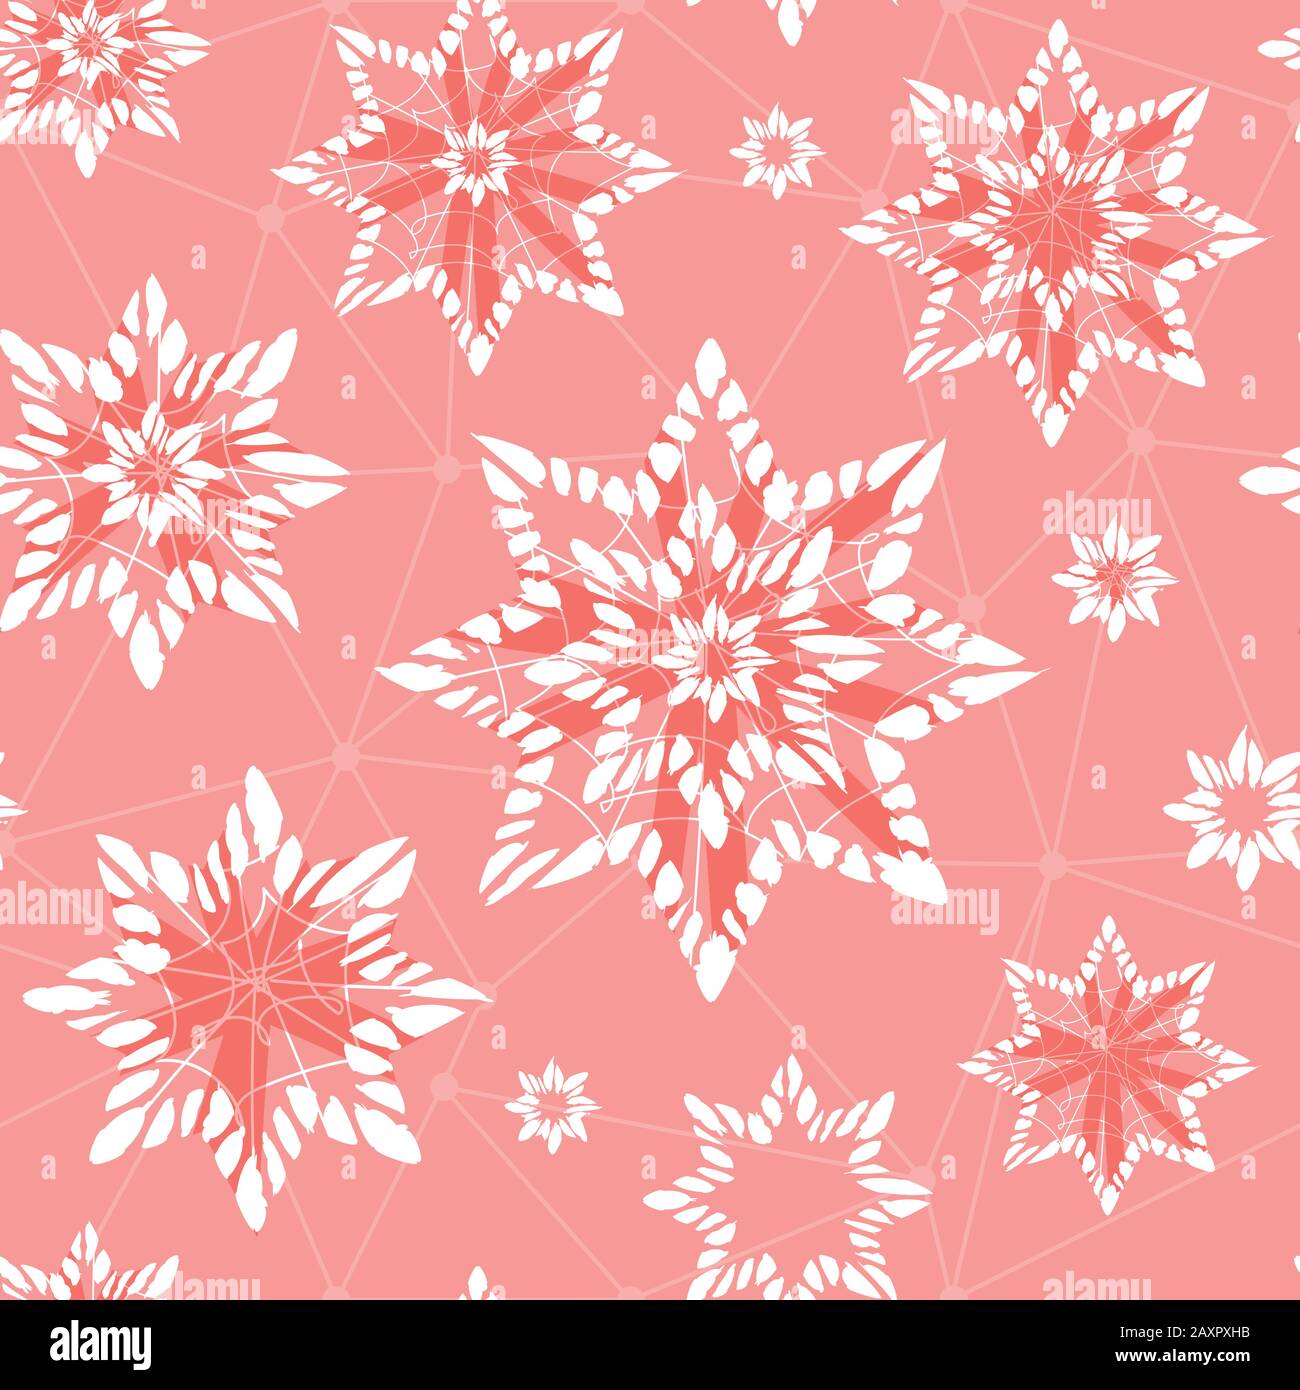 Vector red abstract snowflake stars seamless background 09. Suitable for textile, gift wrap and wallpaper. Stock Vector